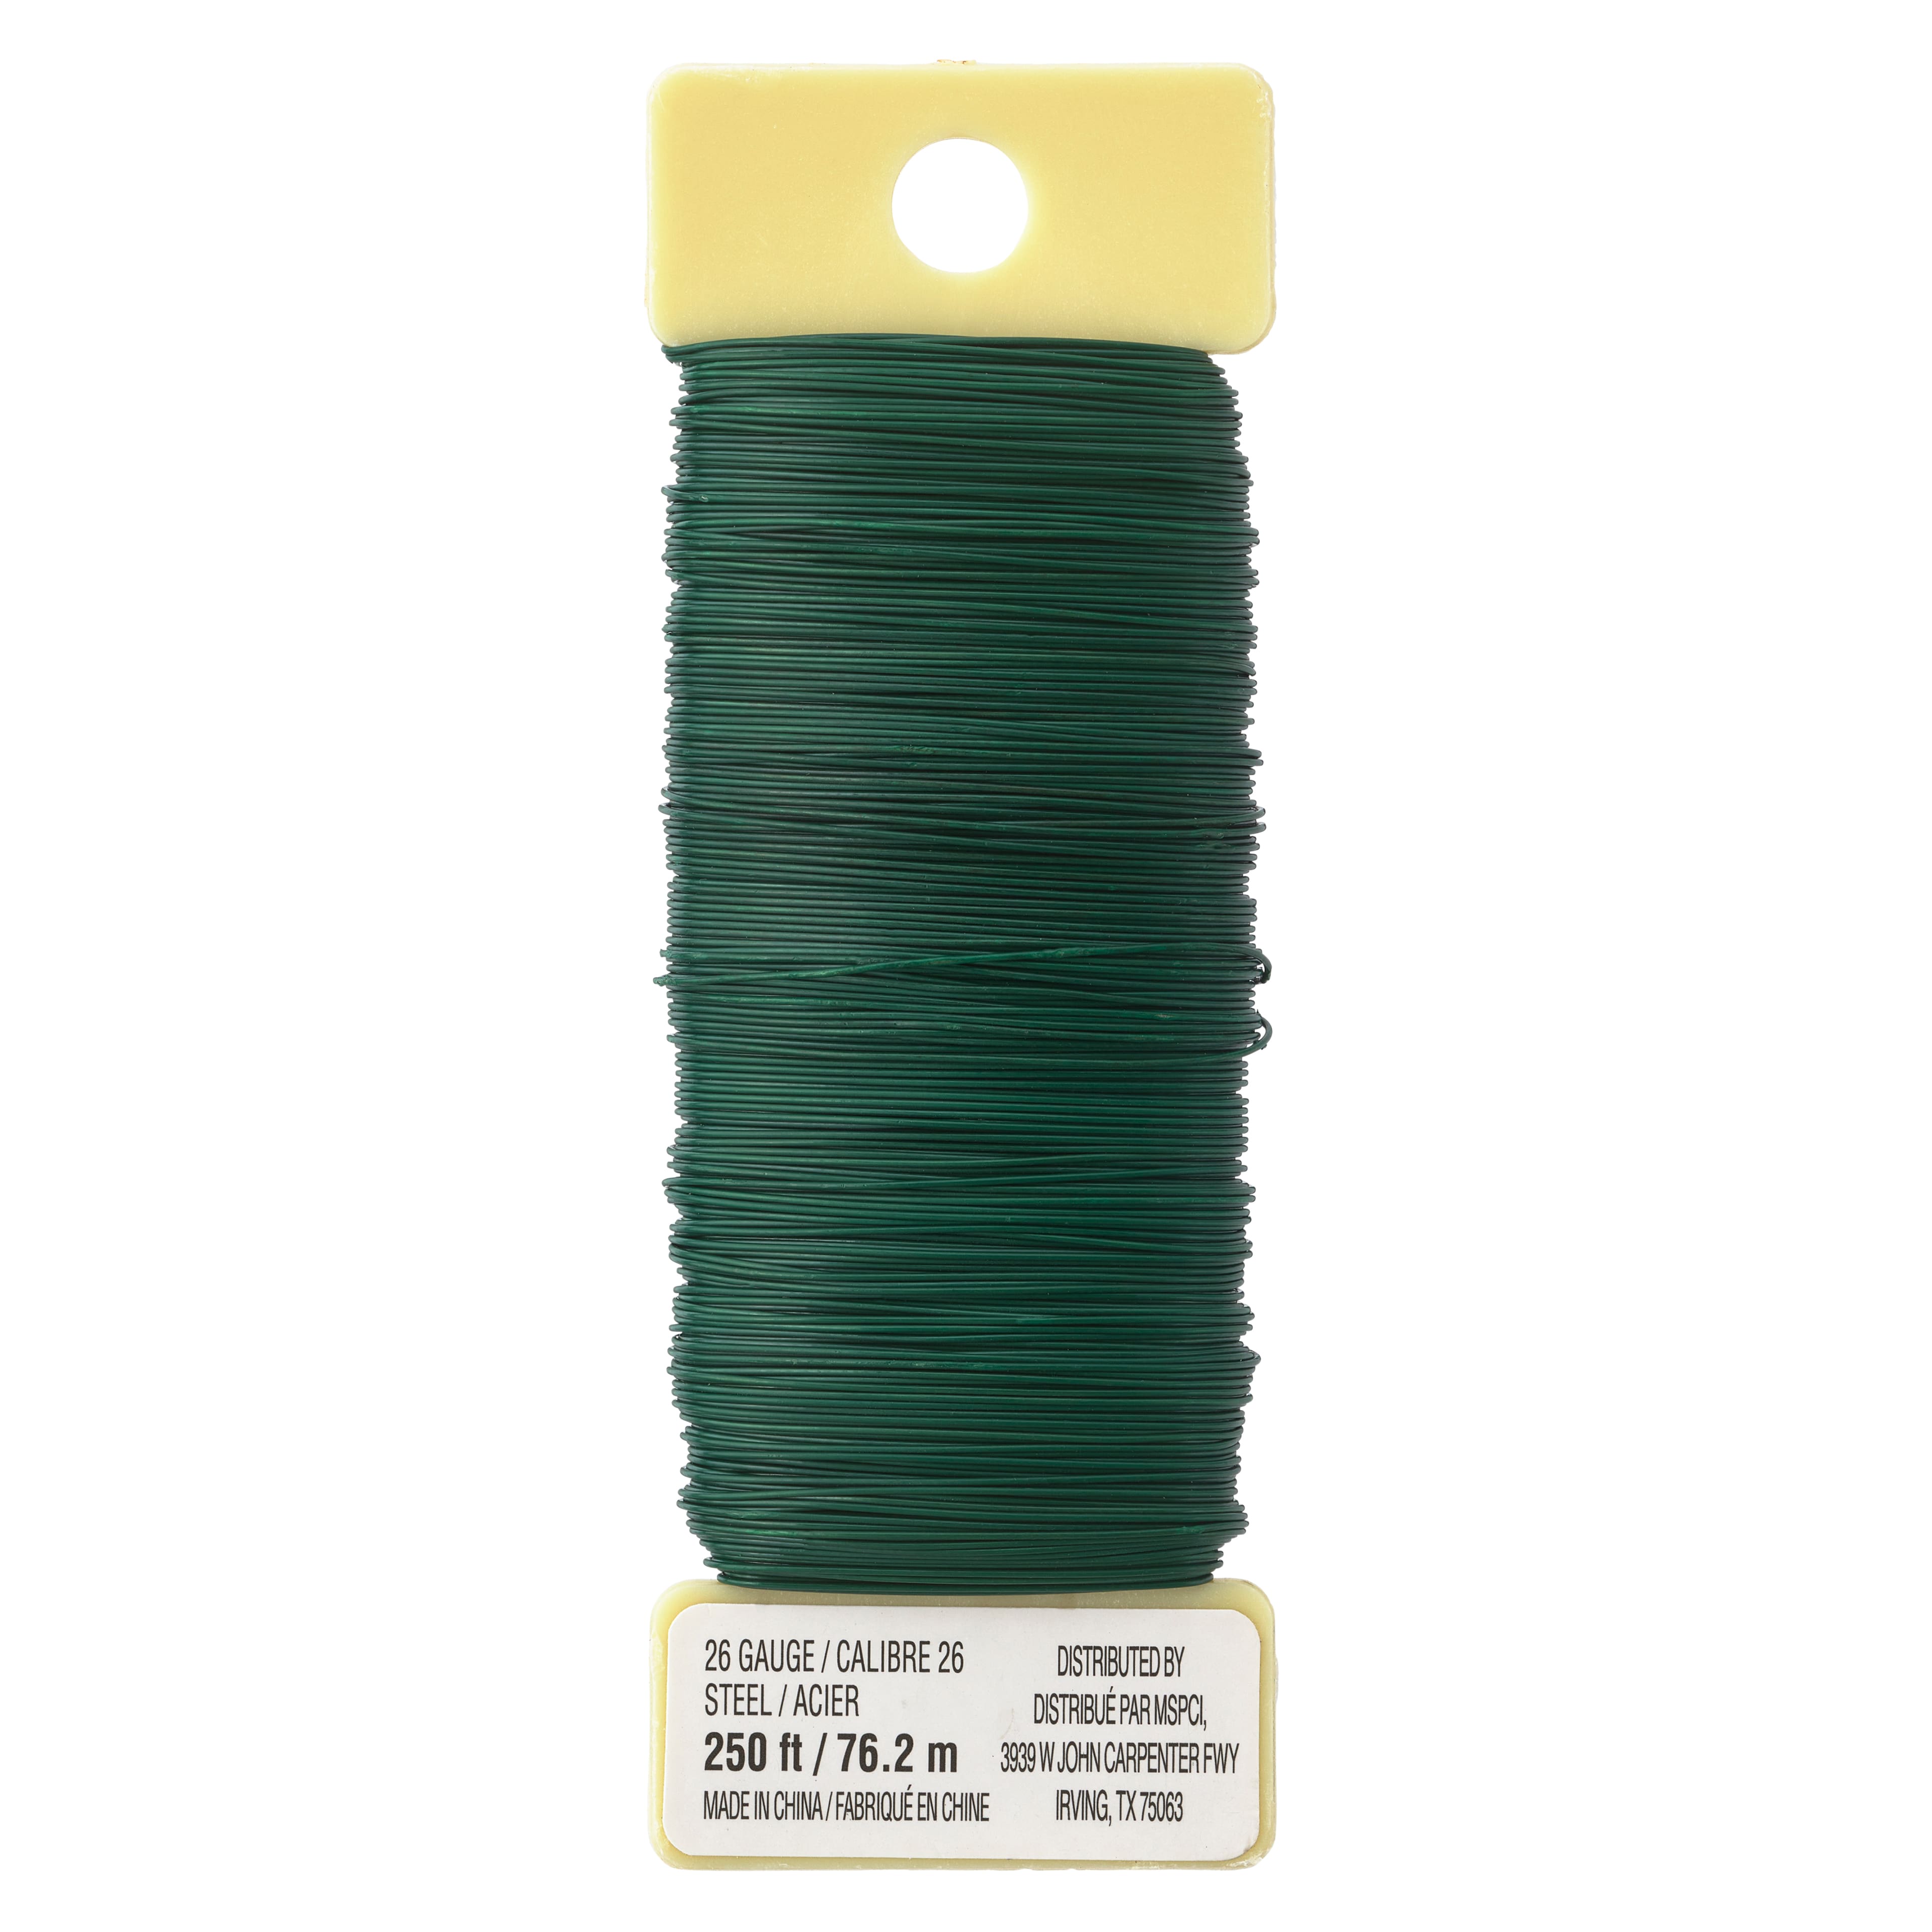 Lia Griffith 18 Gauge Floral Wire Green 